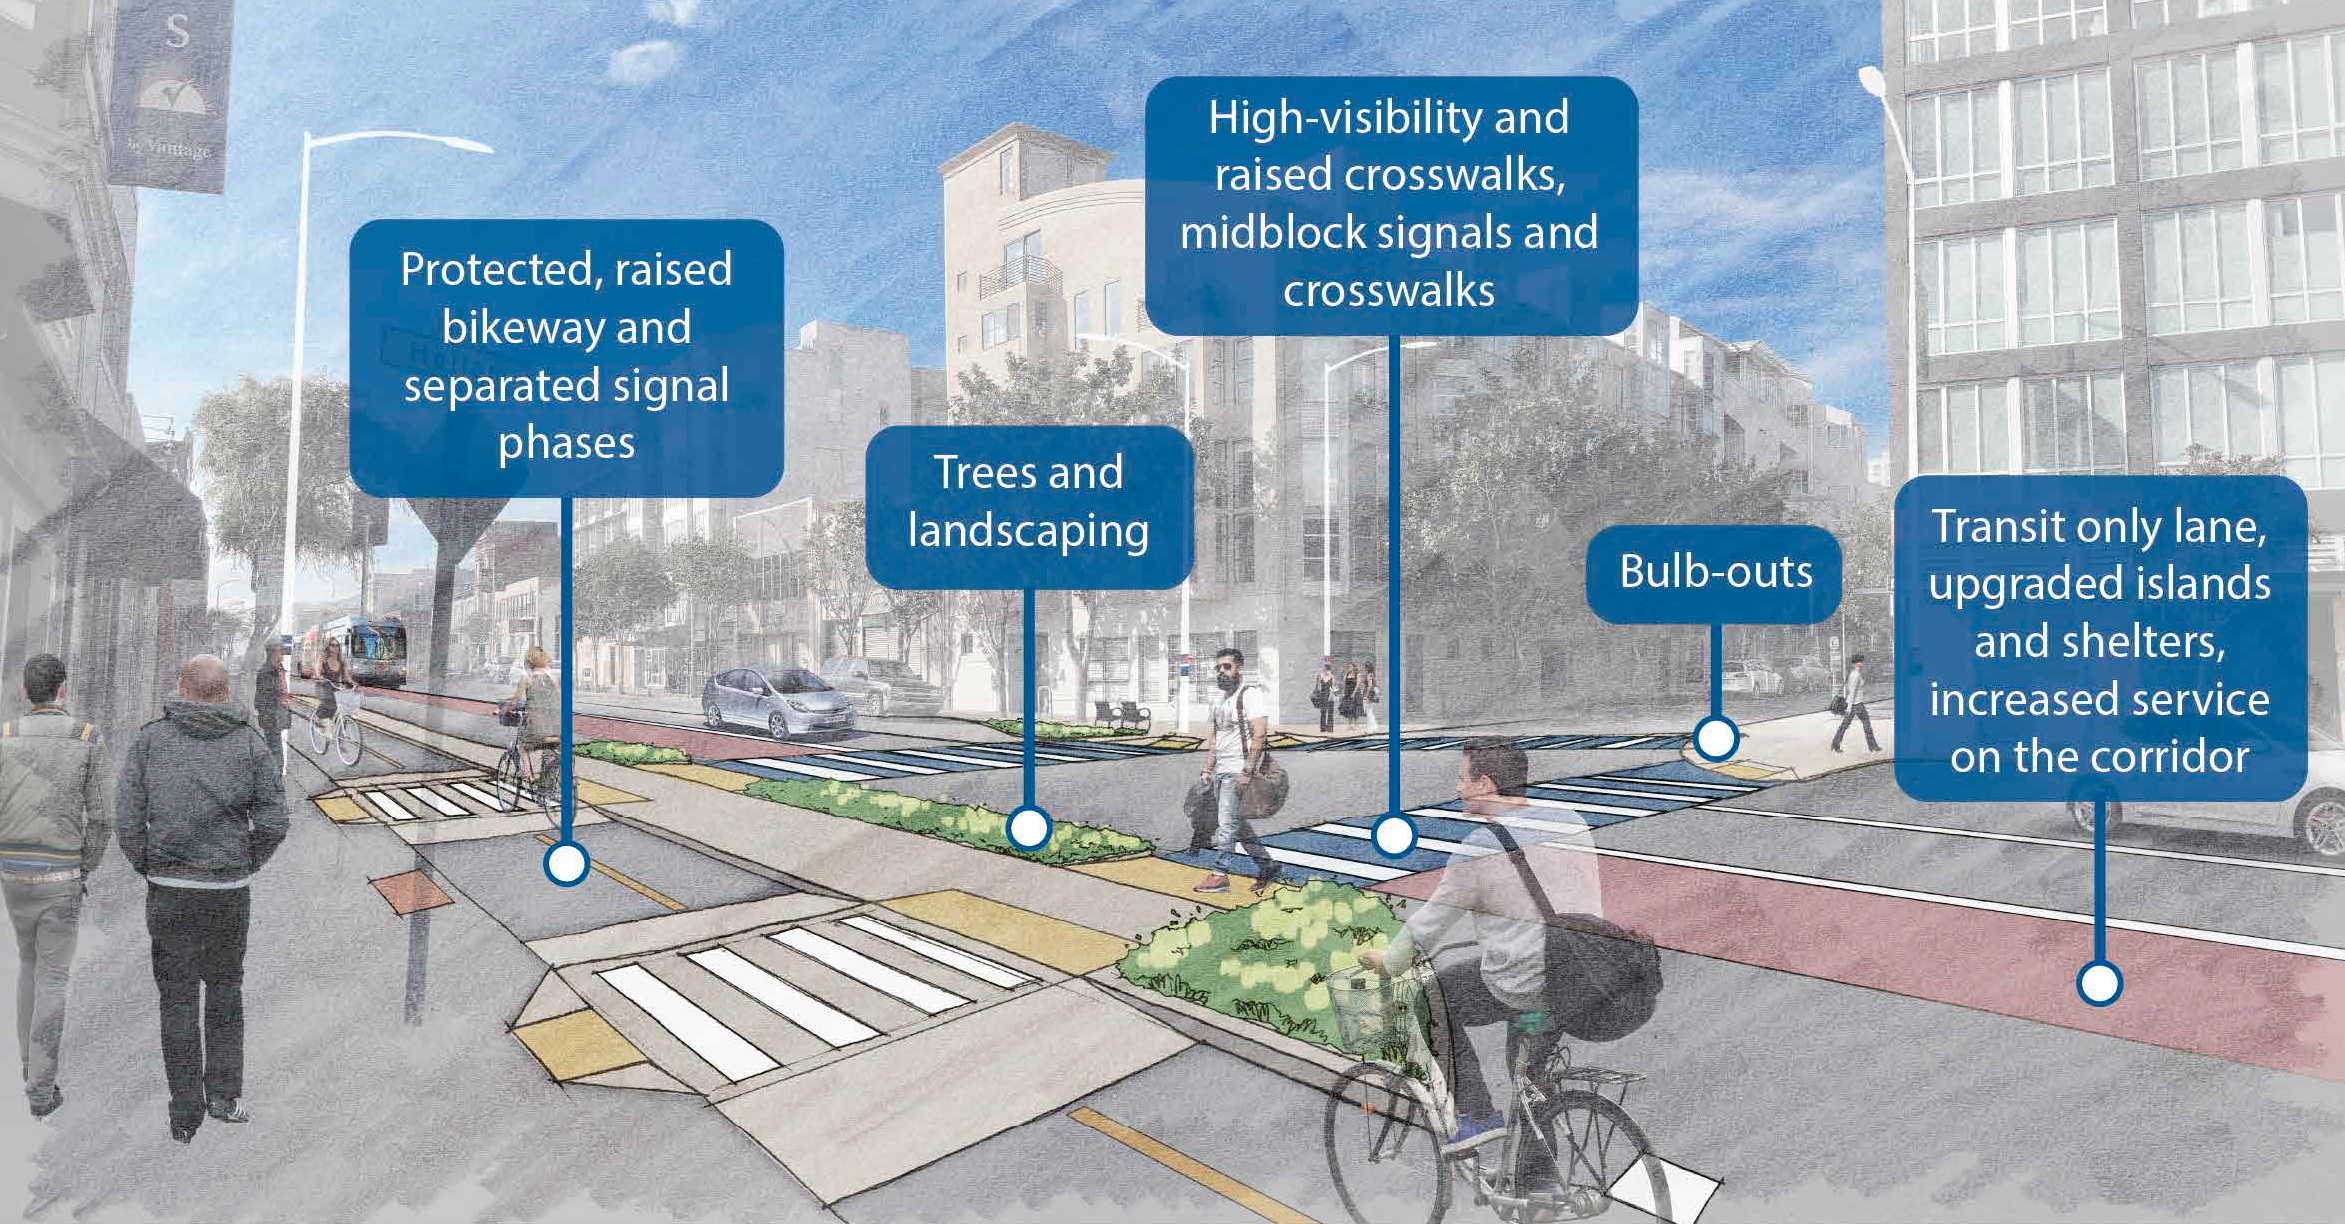 An illustration of a street scape highlights a two-way bike lane, trees and landscaping, raised crosswalks and a transit-only lane.